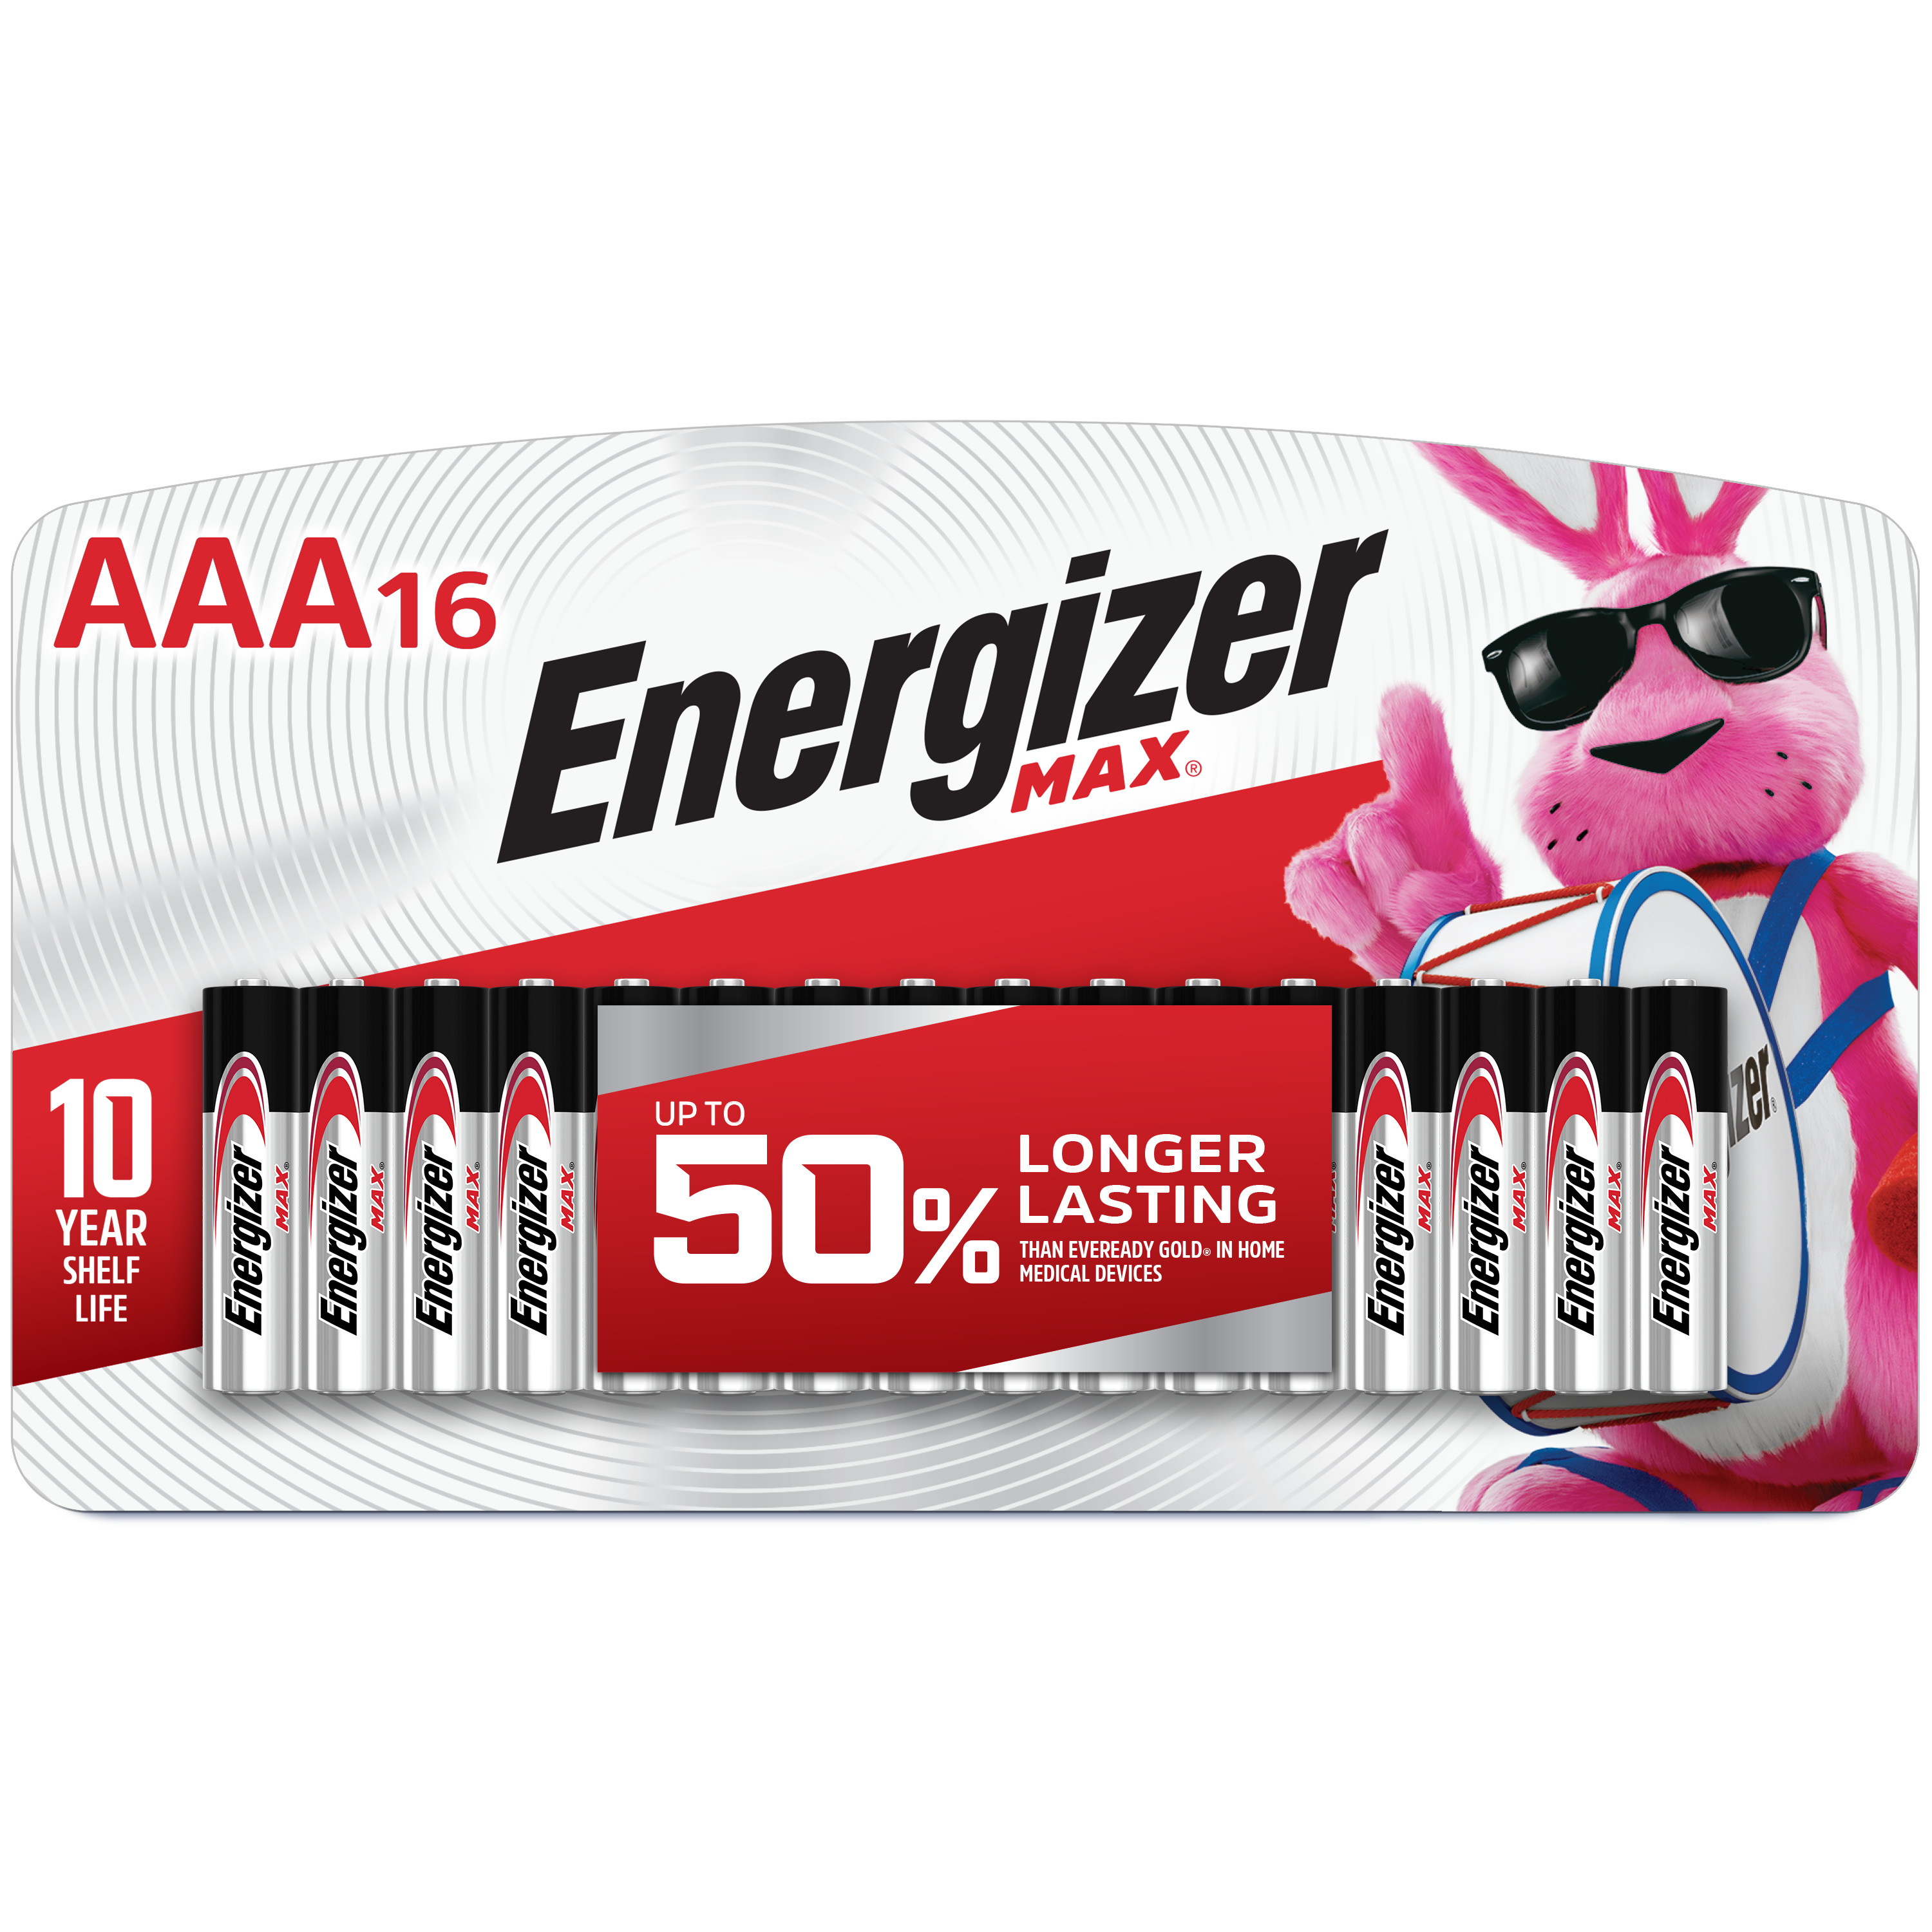 Energizer MAX AAA Batteries (16 Pack), Triple A Alkaline Batteries - image 1 of 15